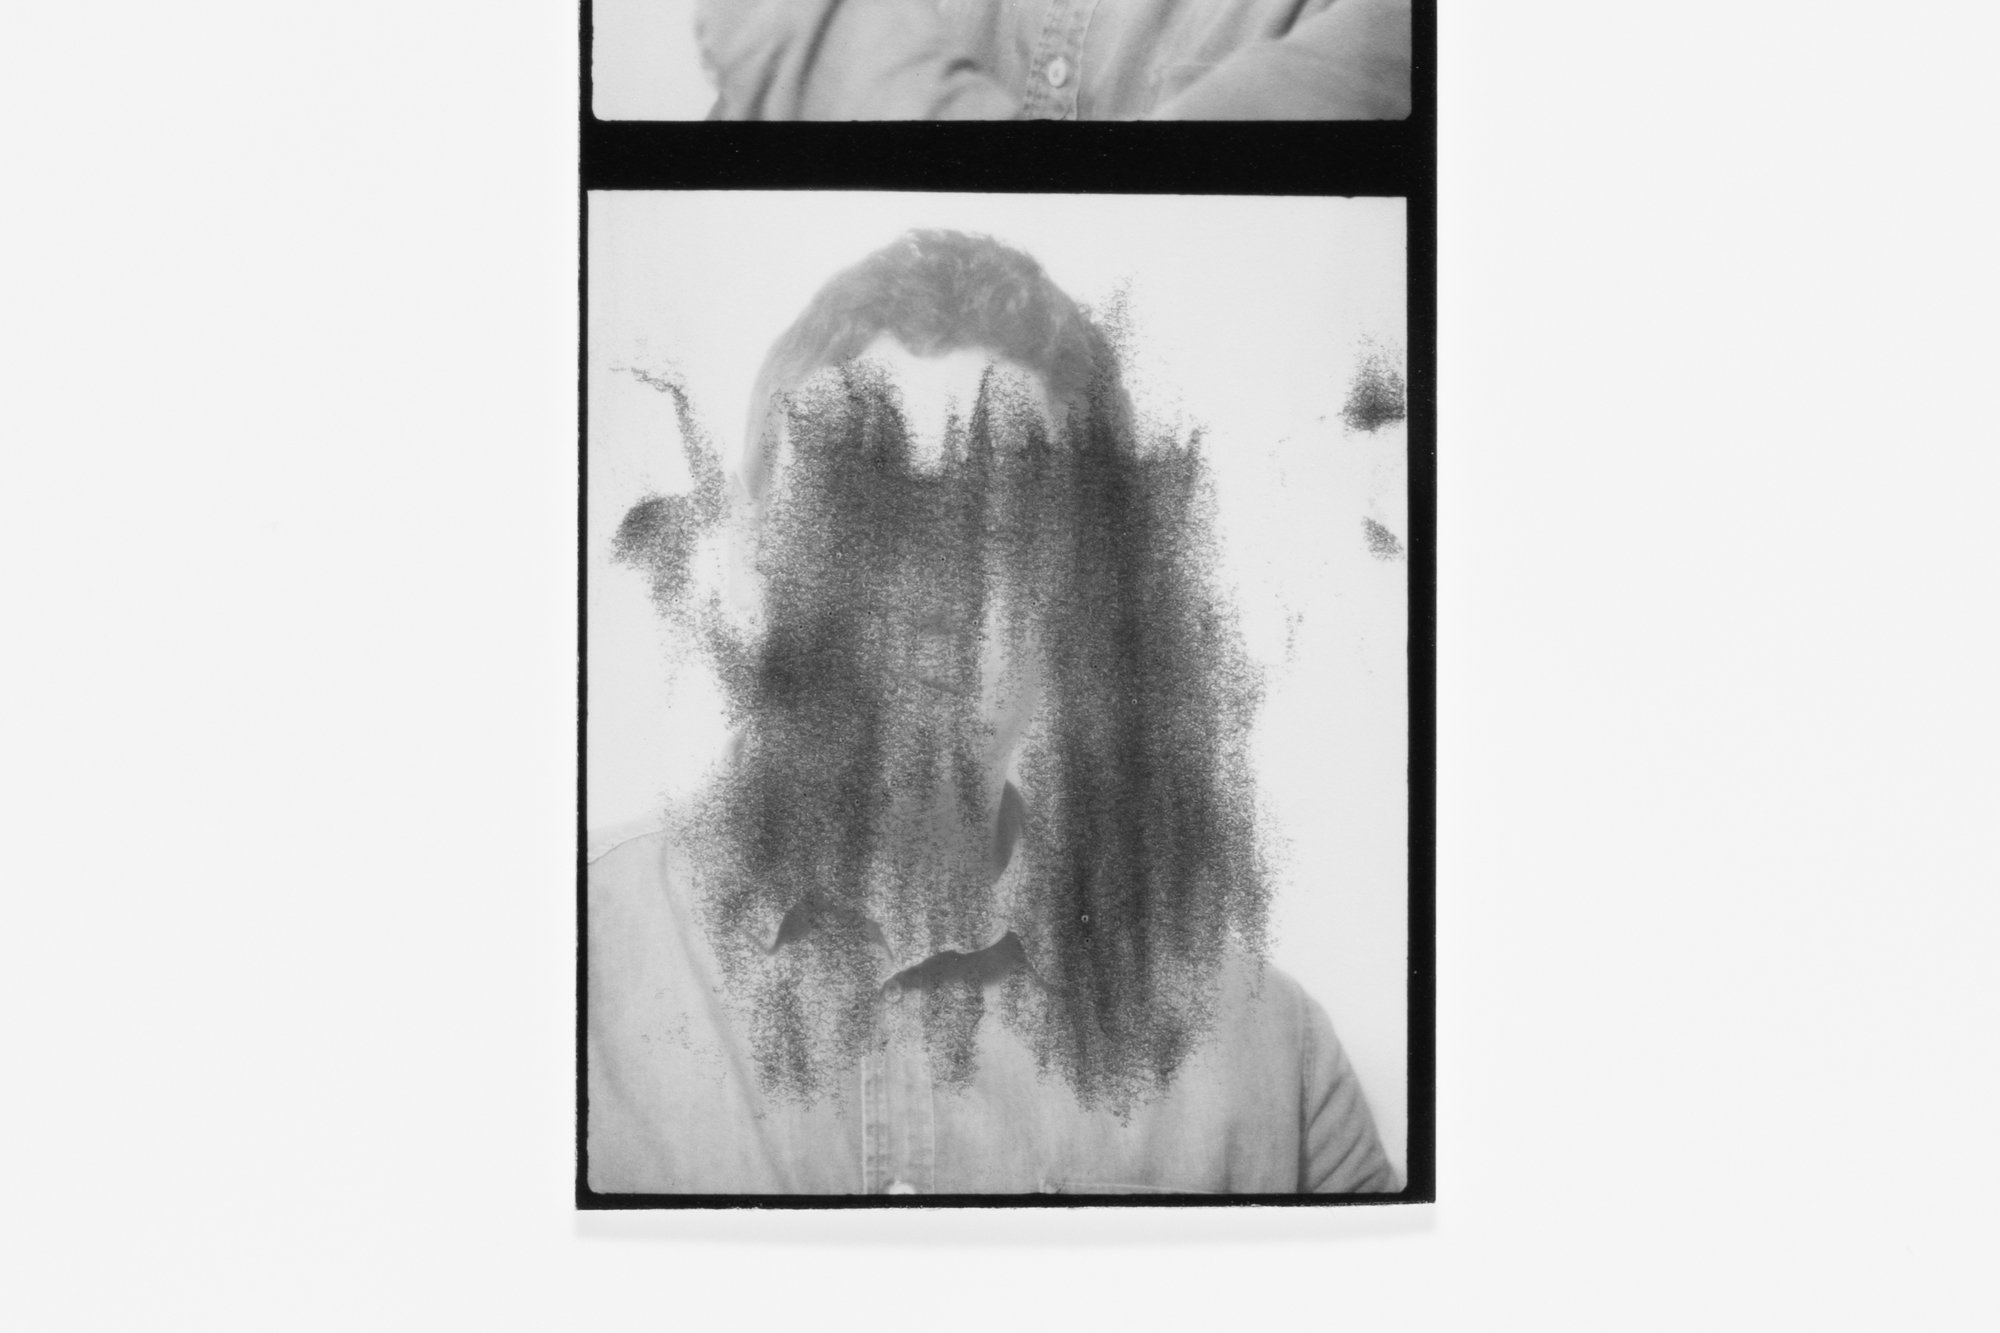      'Error / Portraits' is an unintentional collection of analog photo failures.  Wrong exposures, expired rolls, exhausted chemicals, light leaks, glitches during scanning, started to take the shape of an unexpected series.  Collected along the yea